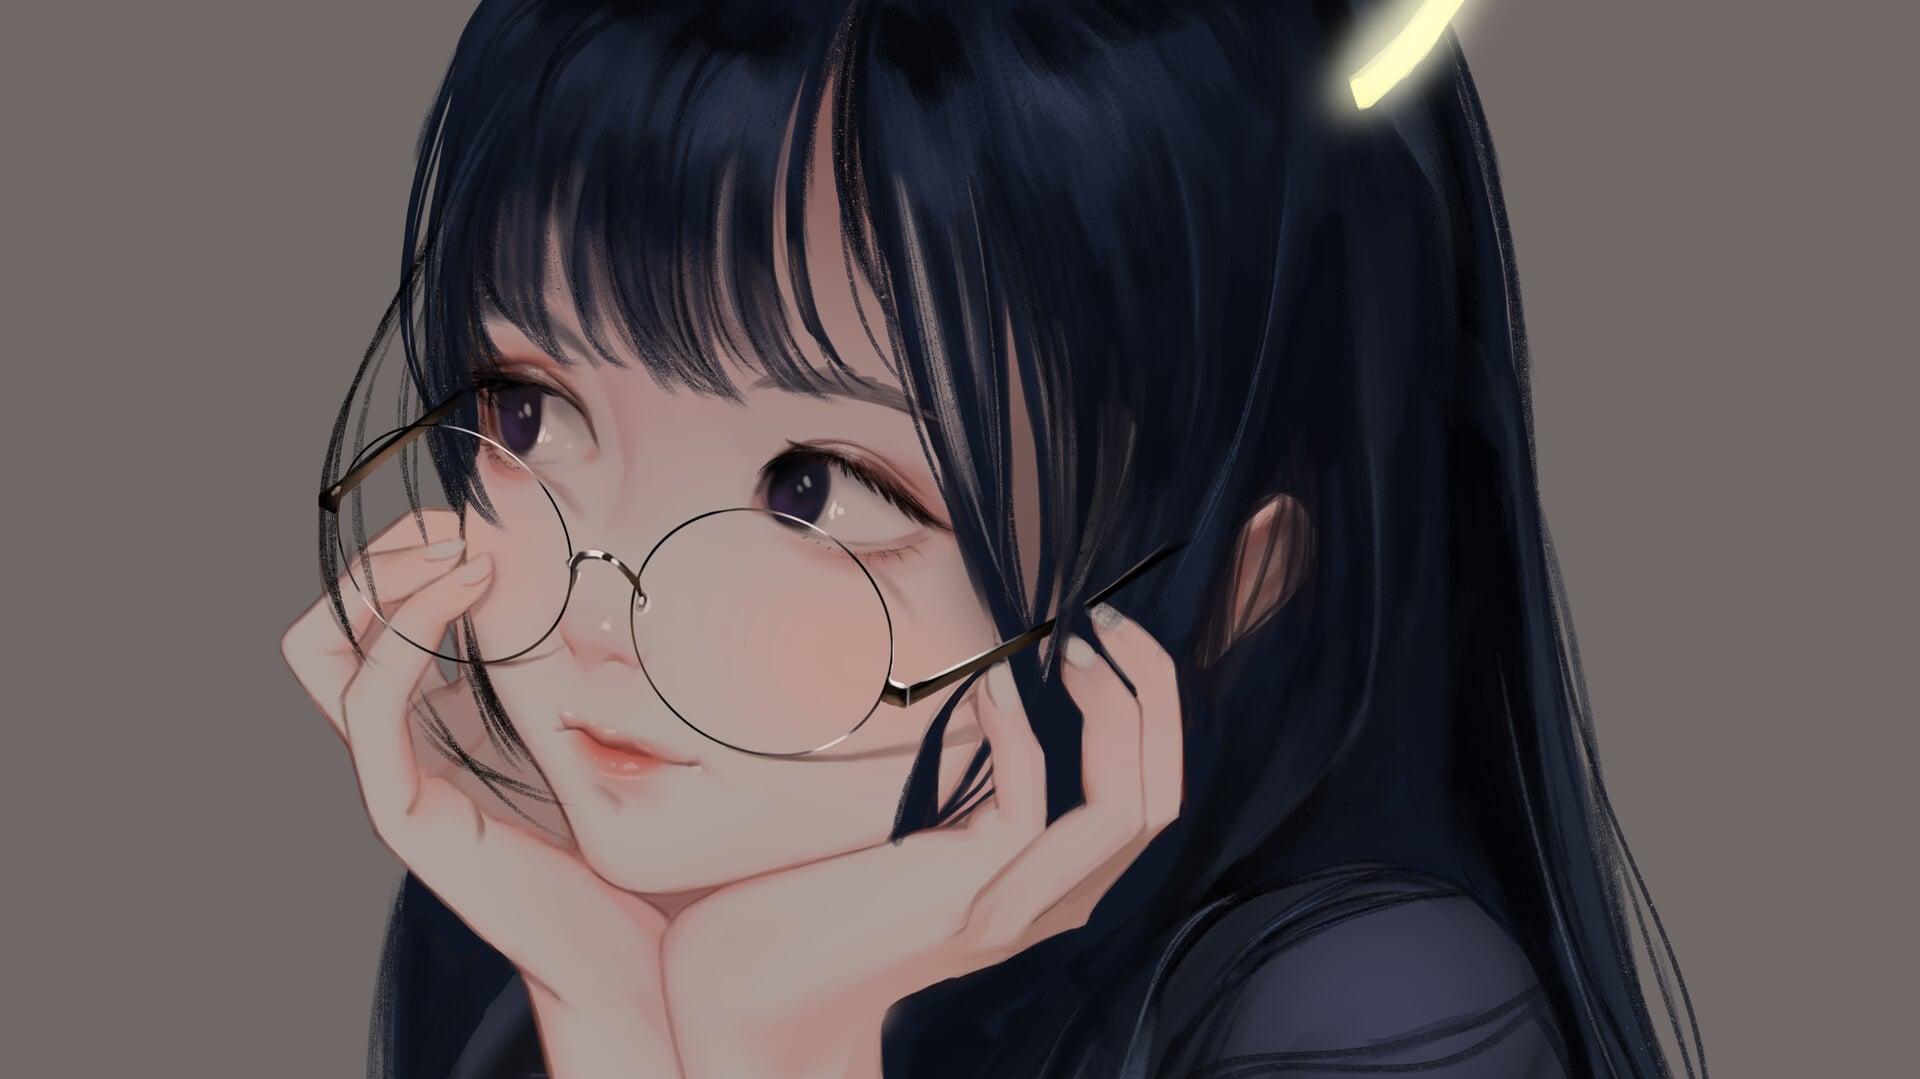 Cute Anime Girl with Glasses rwallpapers